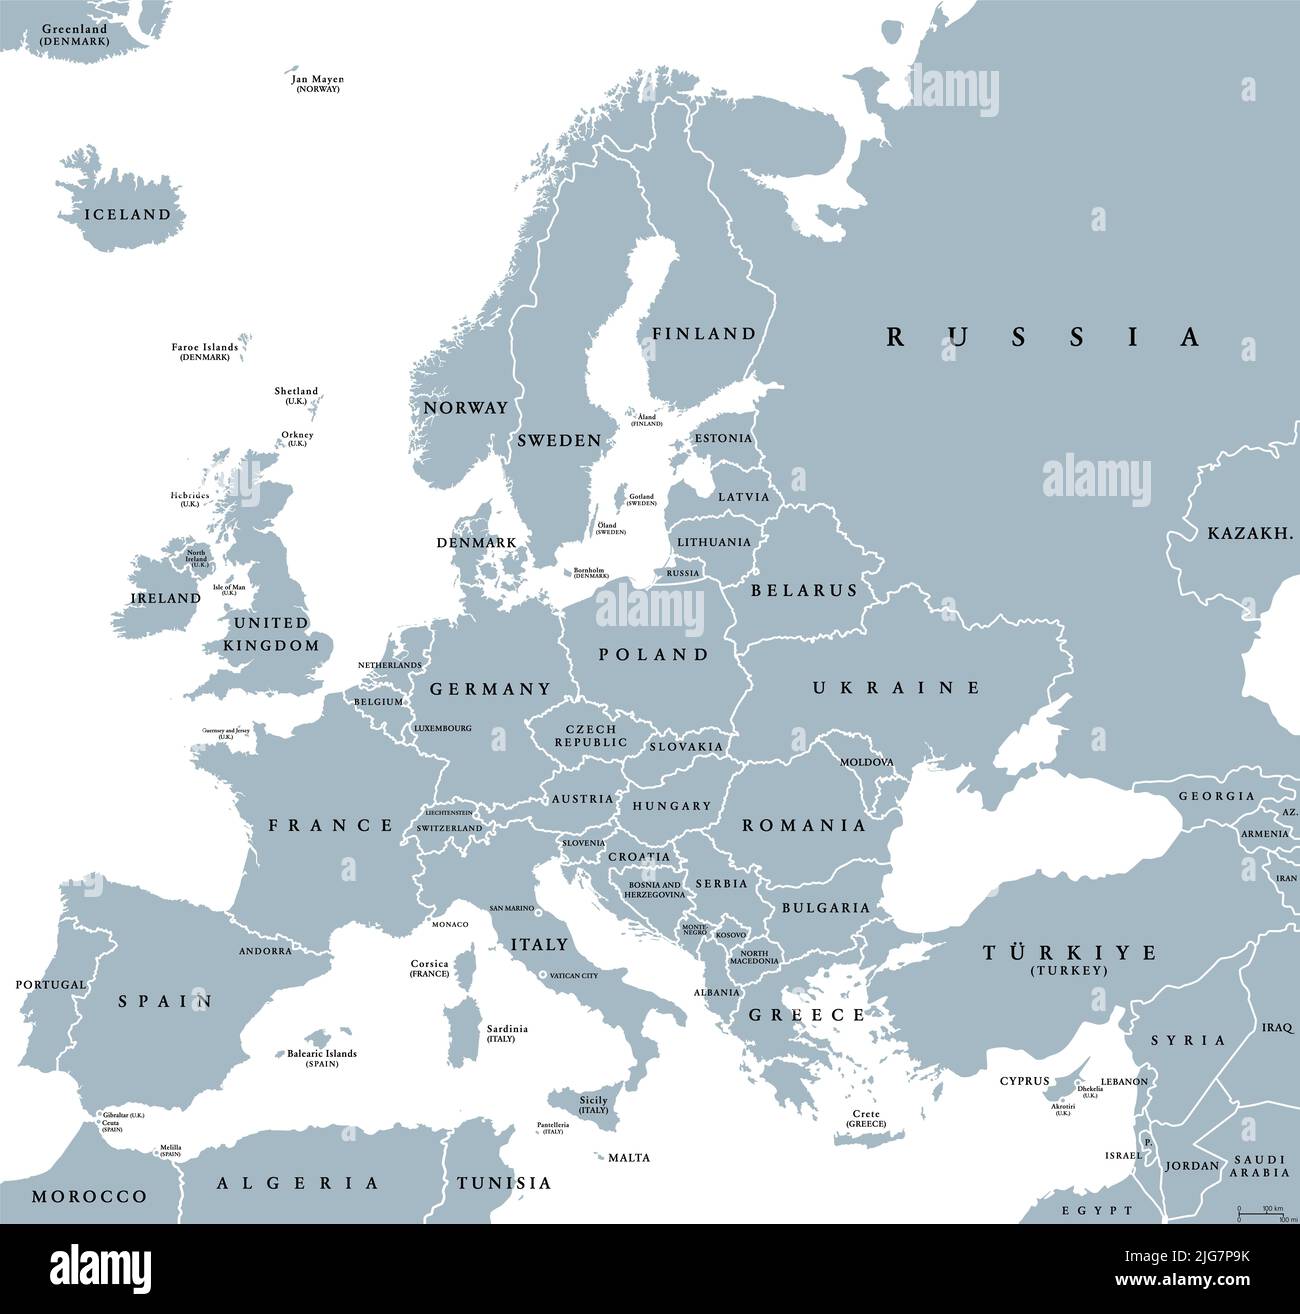 Europe with a part of the Middle East, gray political map. Western part of the continent Eurasia, located in the Northern Hemisphere. Stock Photo